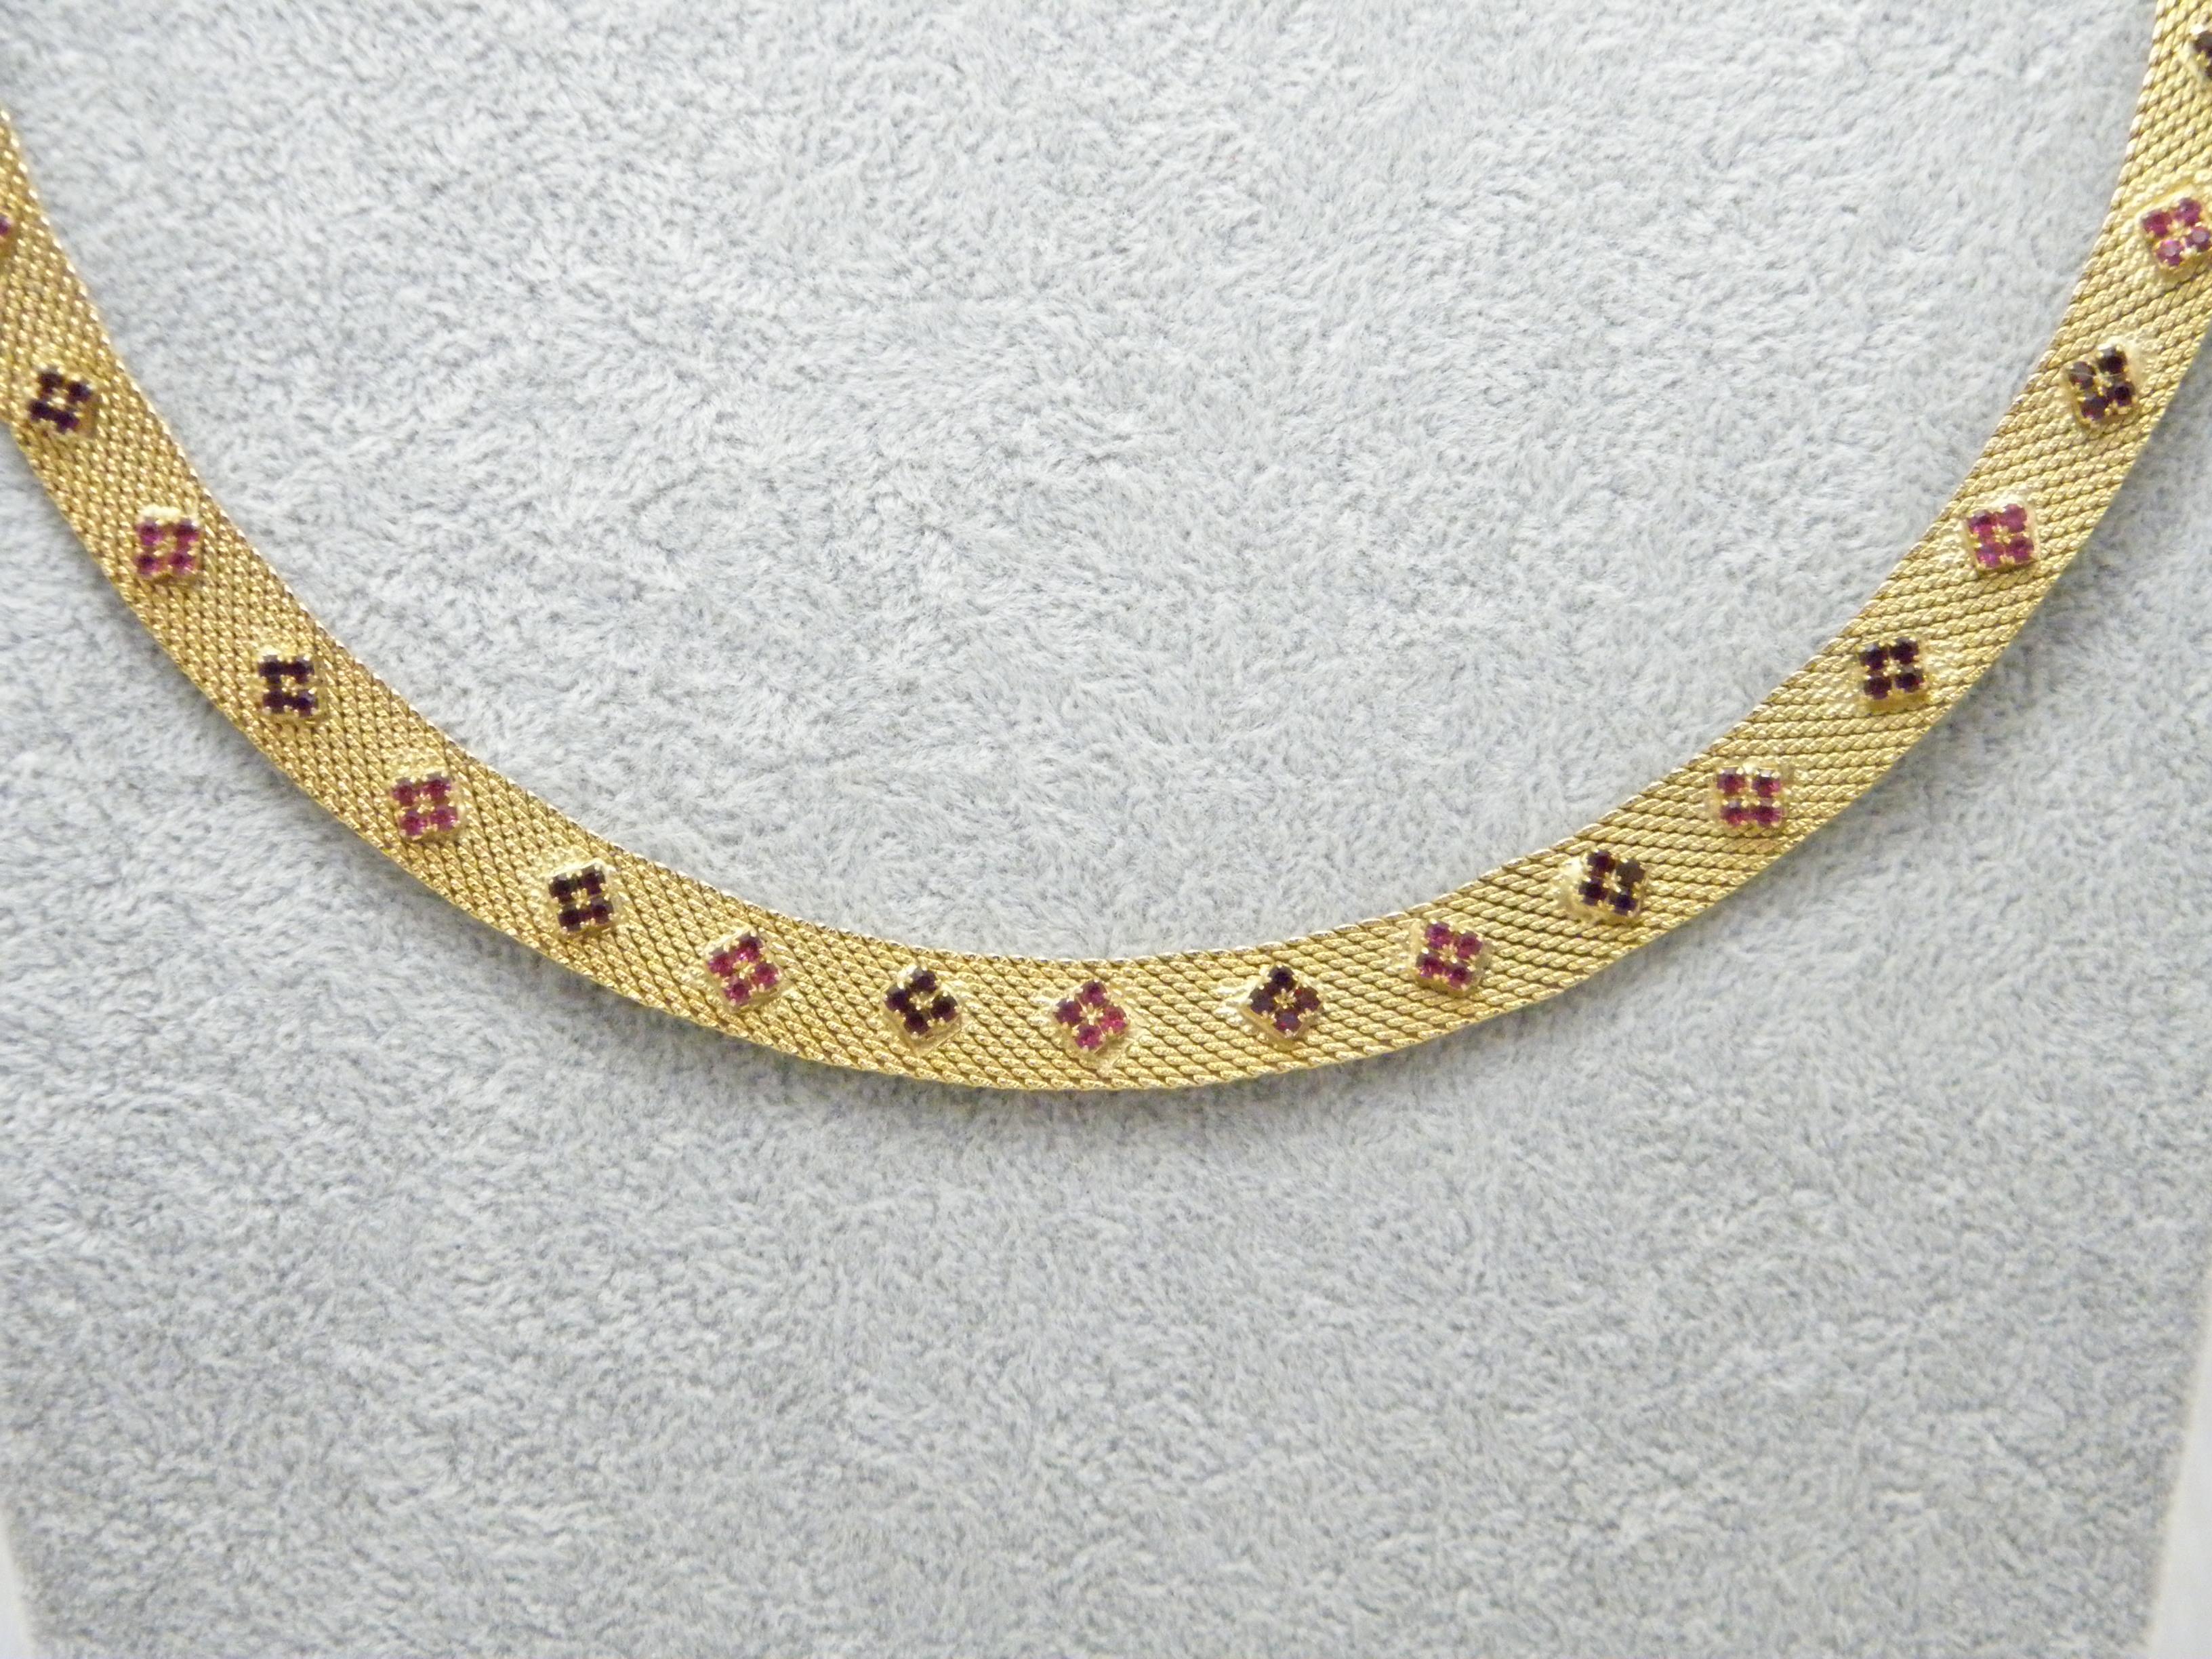 If you have landed on this page then you have an eye for beauty.

On offer is this gorgeous

9CT GOLD ROLLED CLEOPATRA STYLE RUBY AND GARNET PASTE NECKLACE

DETAILS
Material: Thick 9ct Rolled Gold (see details below)
Style: Facetted Cleopatra style